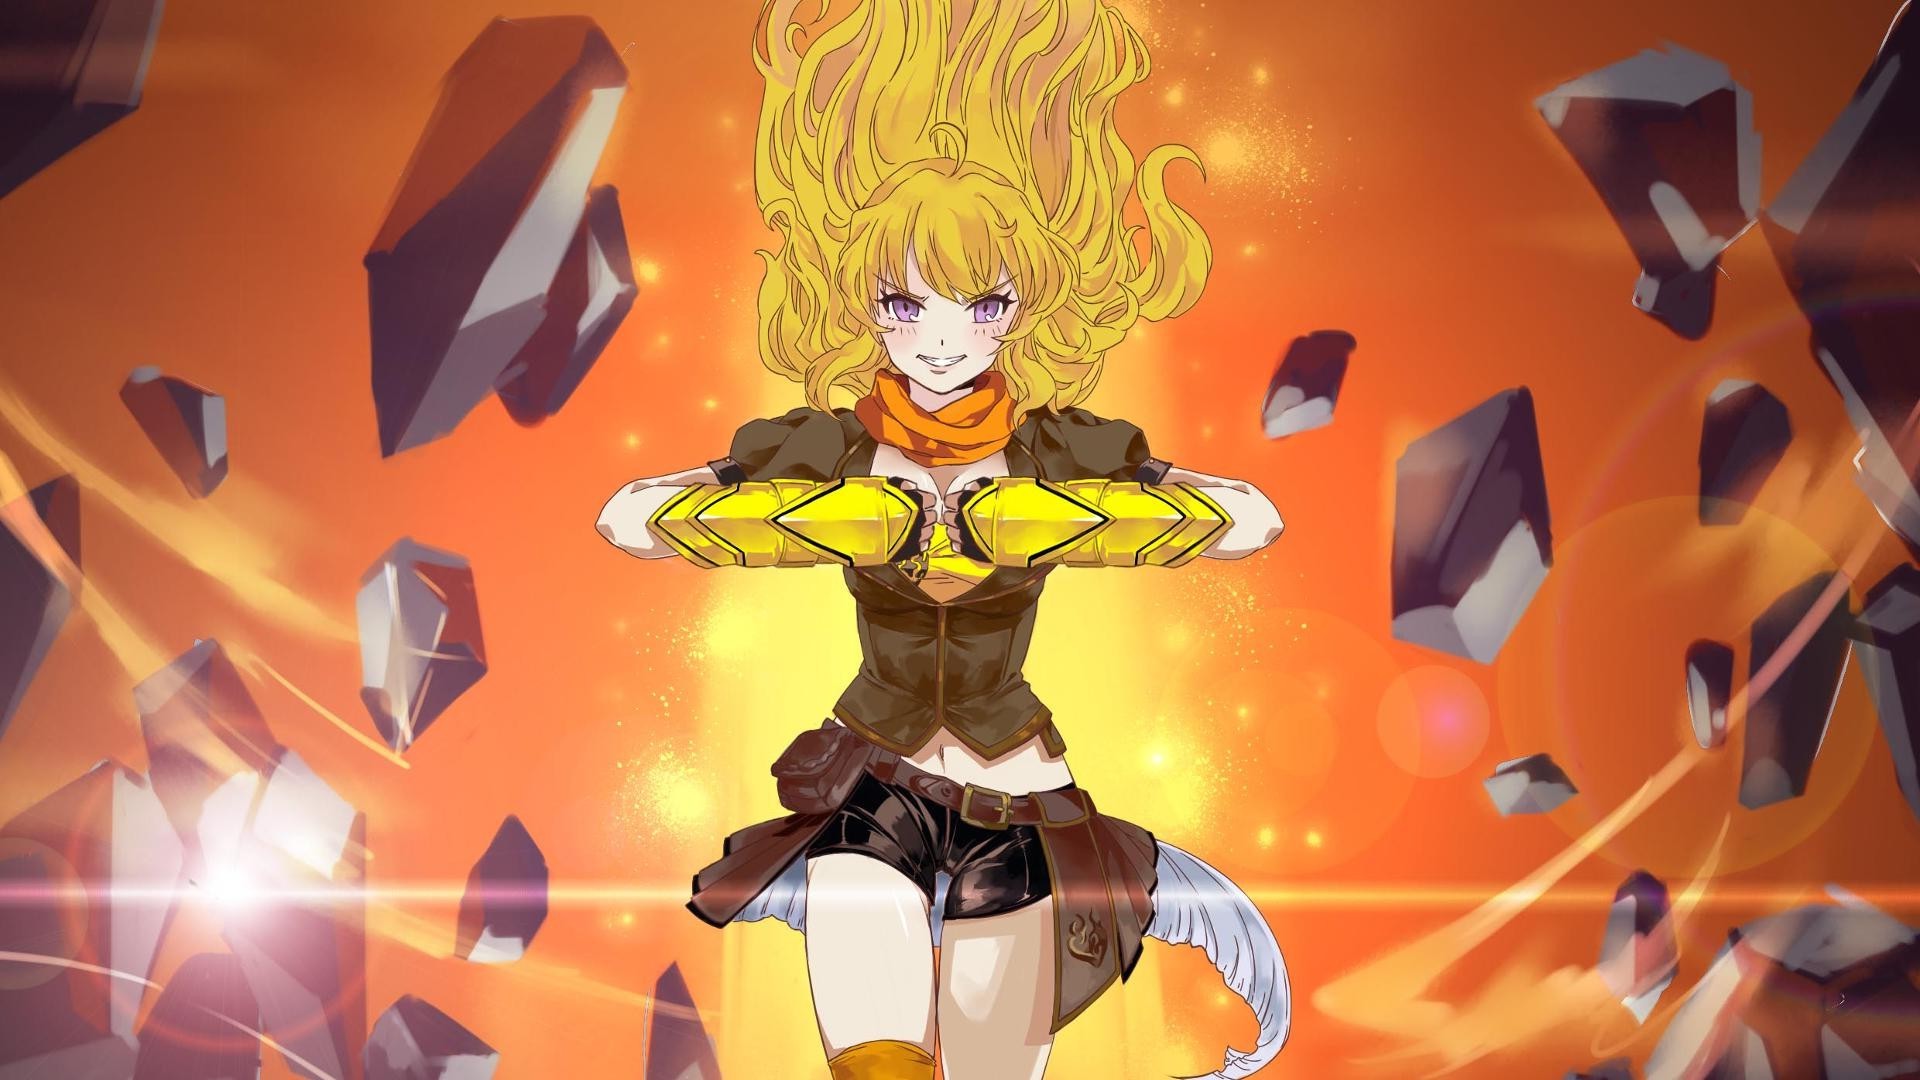 RWBY, Yang Xiao Long Wallpapers HD / Desktop and Mobile Backgrounds.